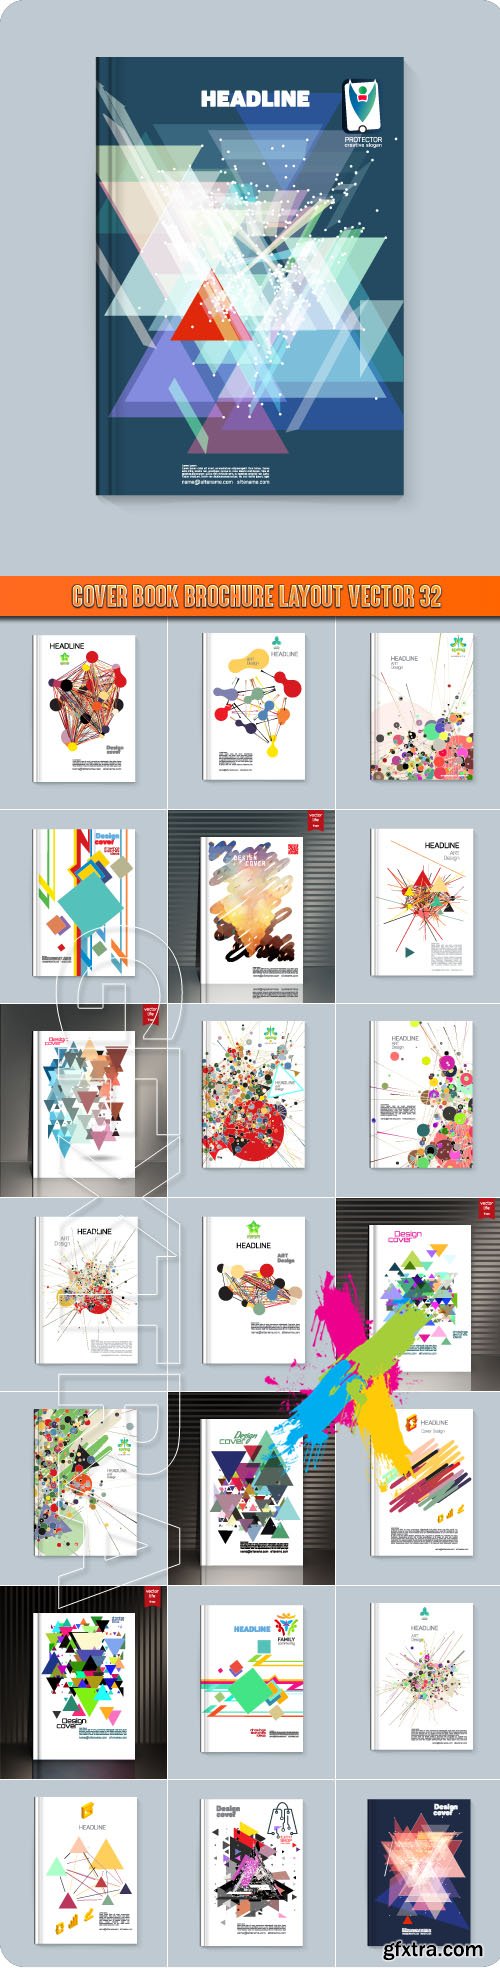 Cover book brochure layout vector 32